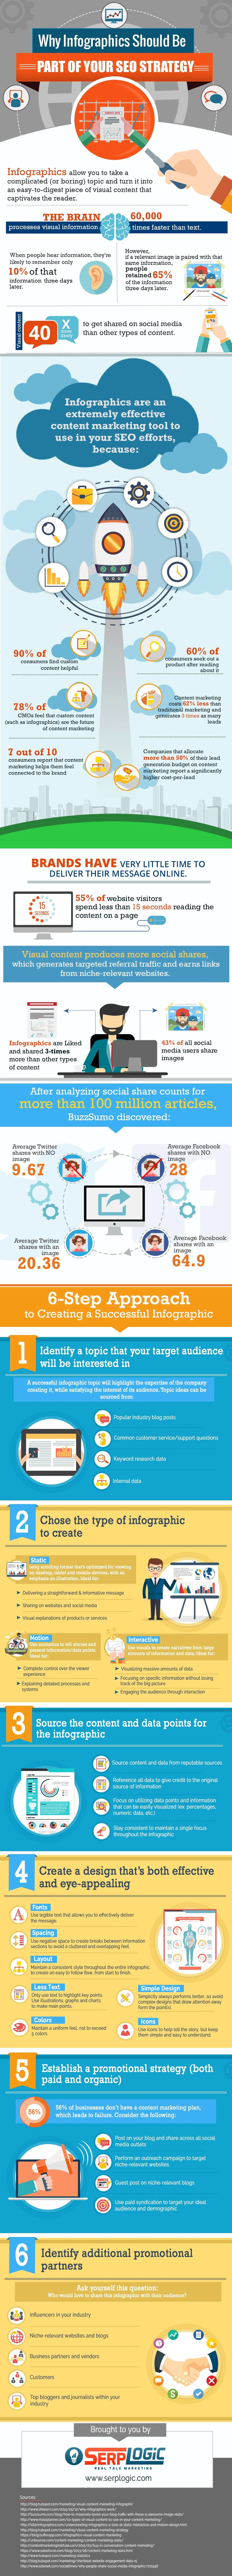 Why Infographics Should Be Part of Your SEO Strategy - #Infographic